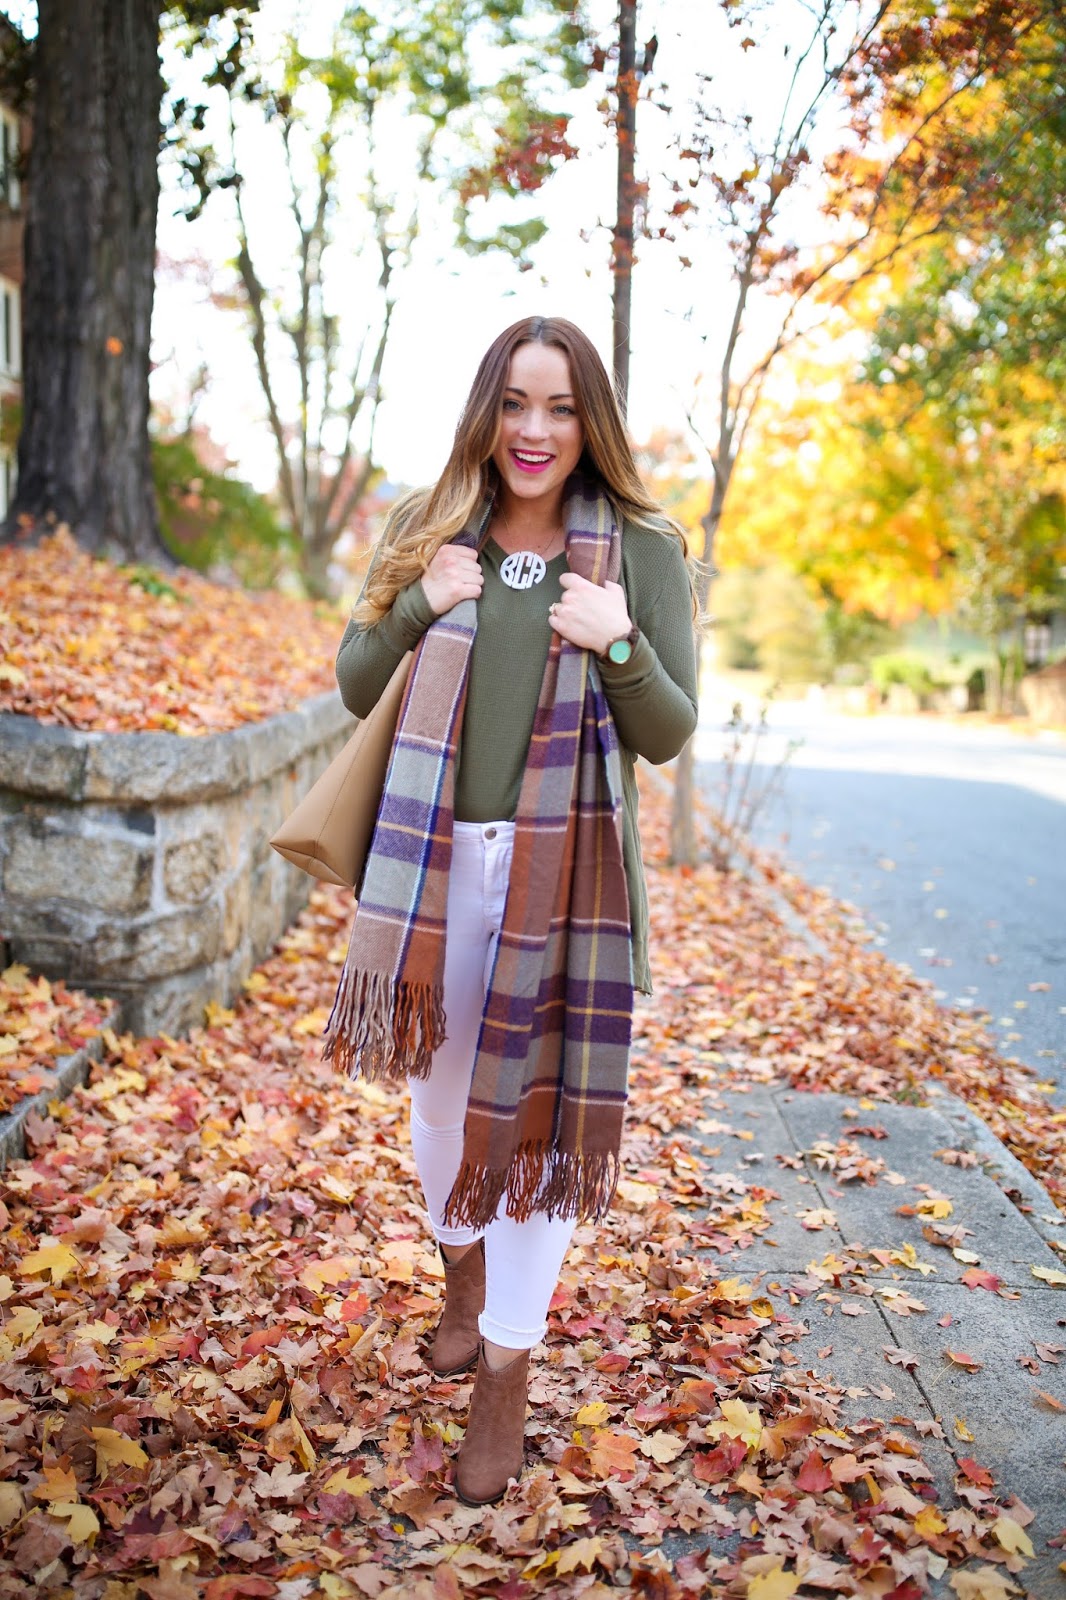 Fall Thermal + Jord Watch Giveaway